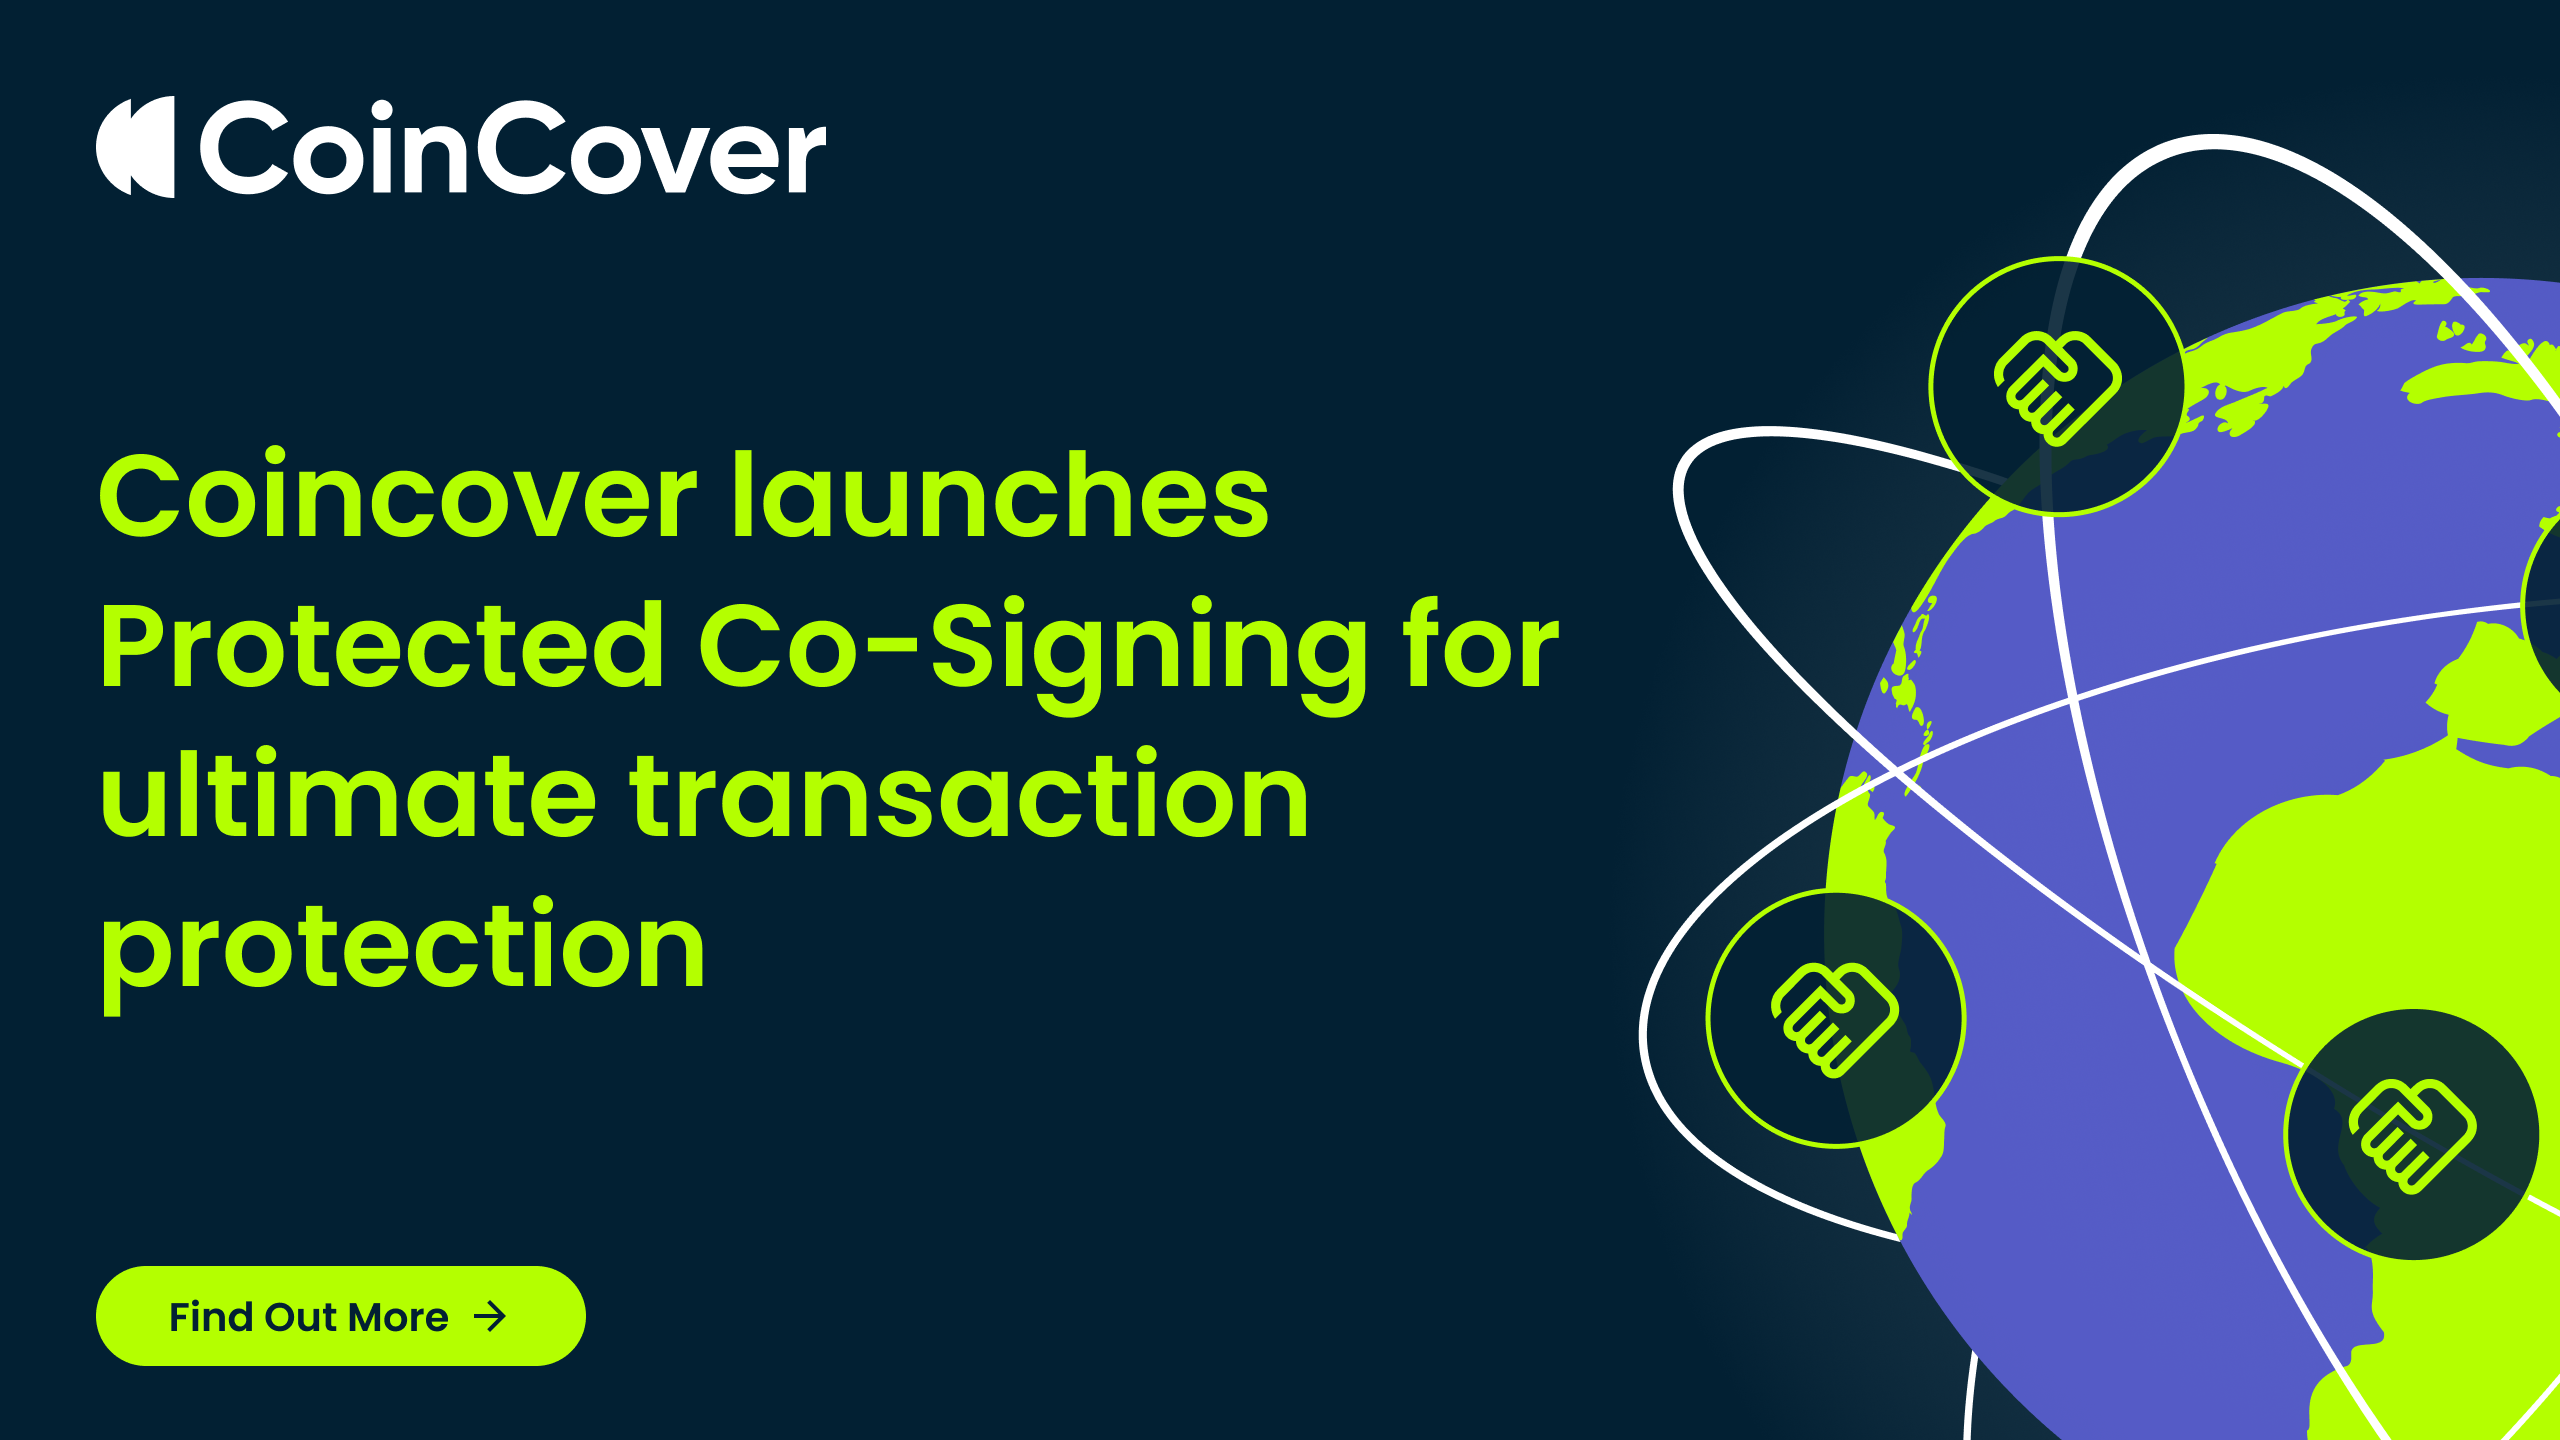 Coincover launches Protected Co-Signing for ultimate transaction protection